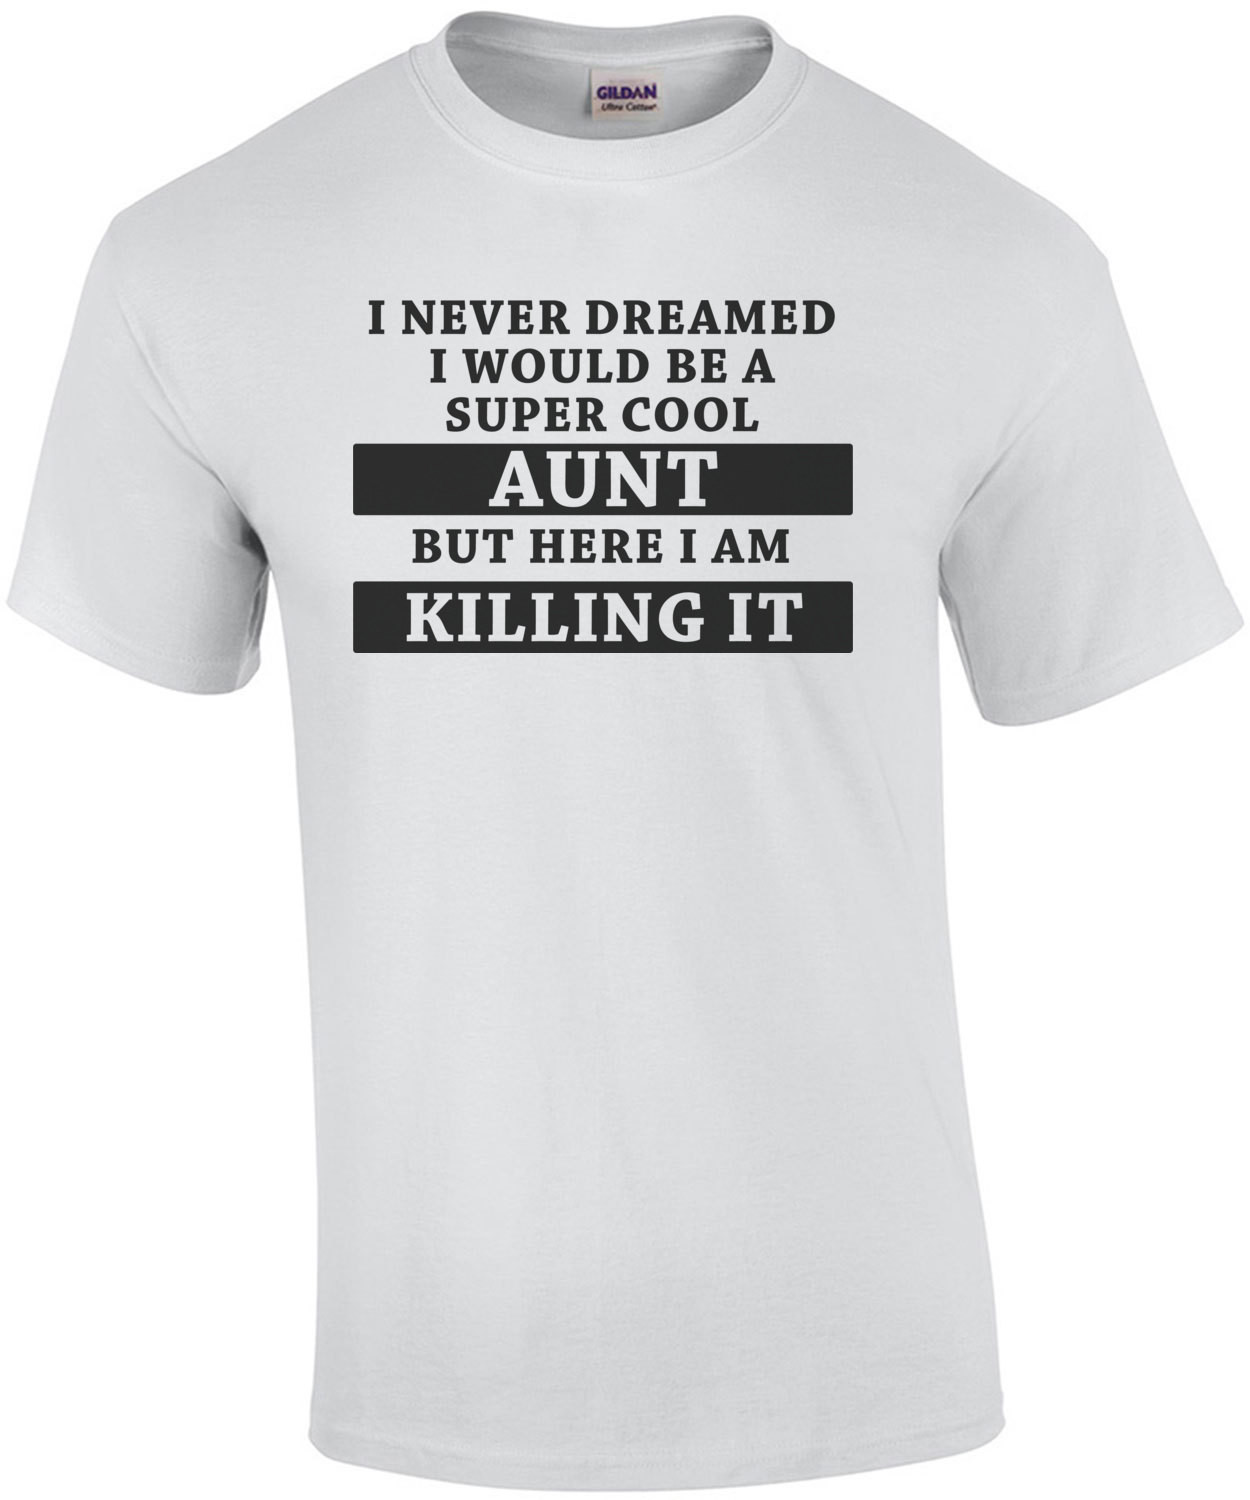 I never dreamed I would be a super cool aunt but here I am Killing it. Funny aunt t-shirt